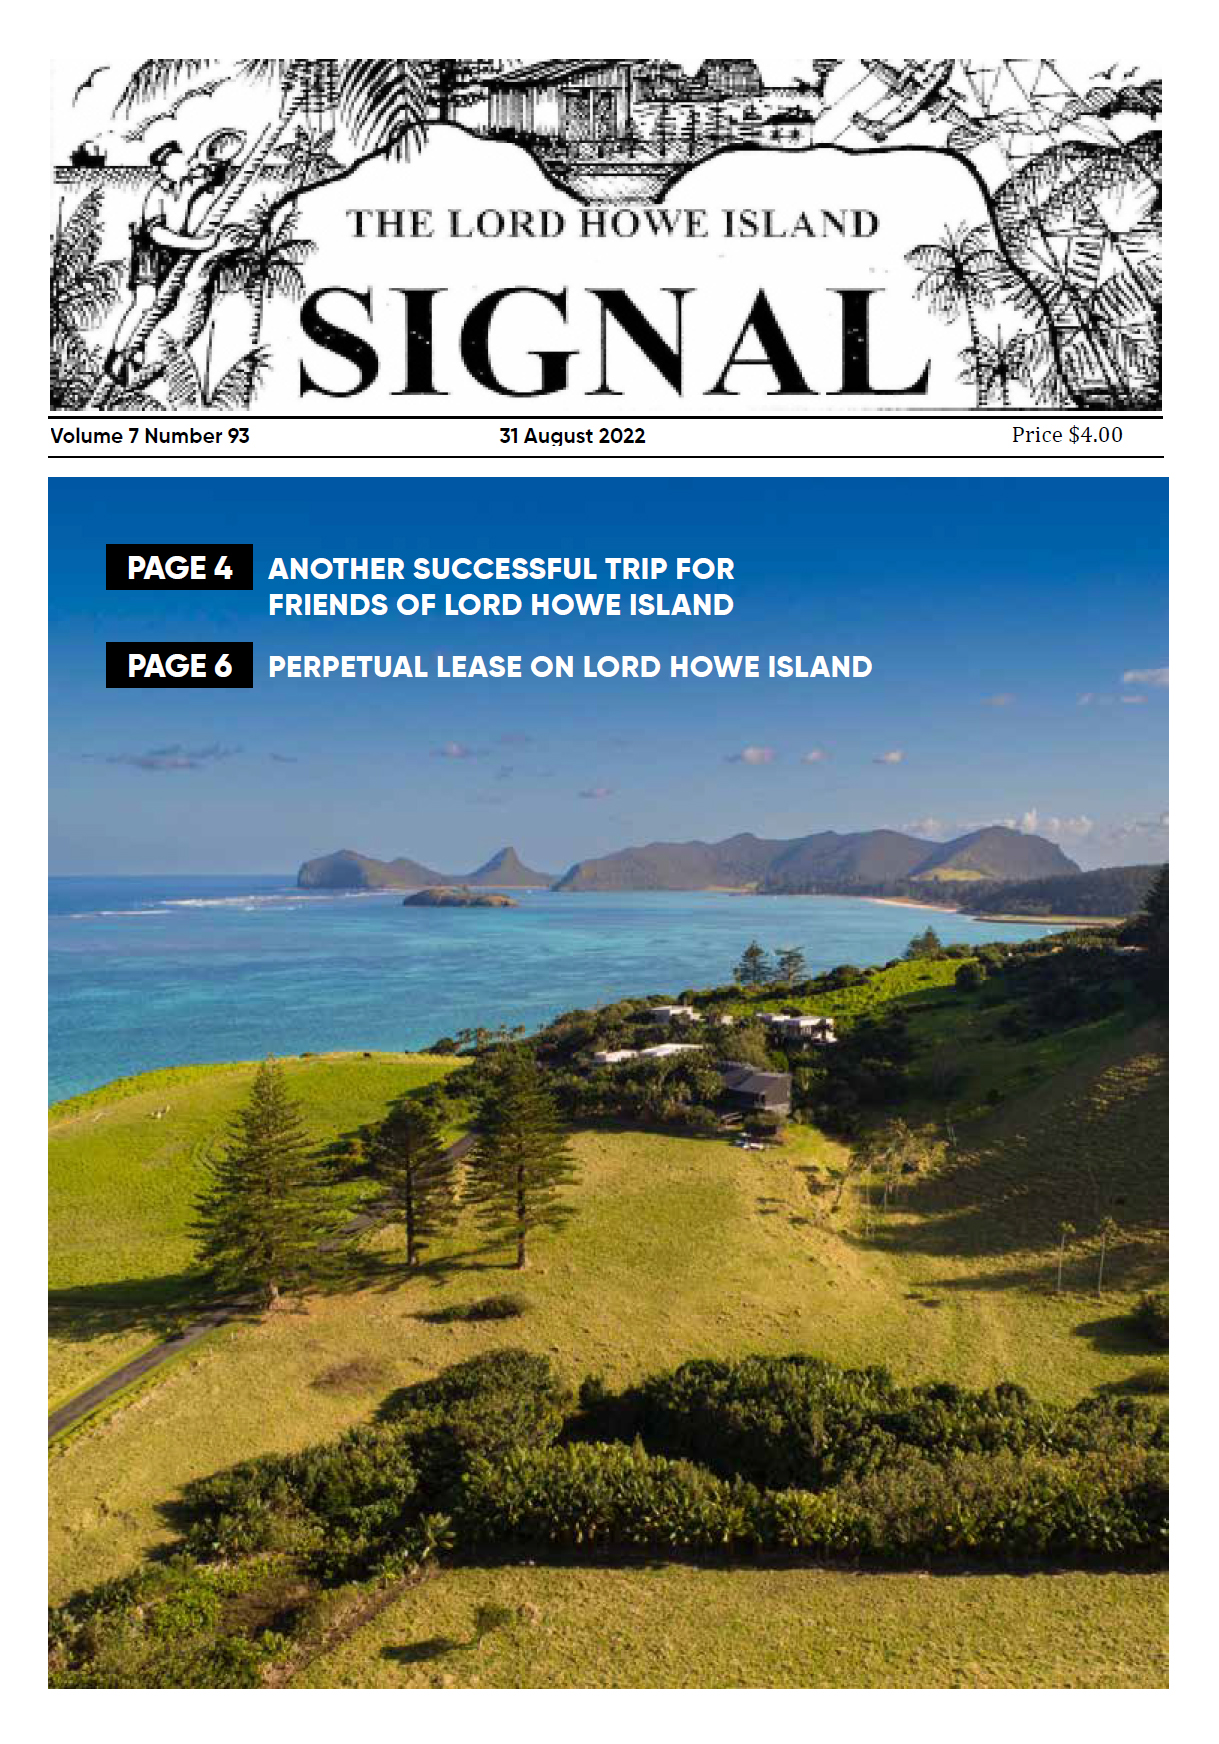 The Lord Howe Island Signal 31 August 2022